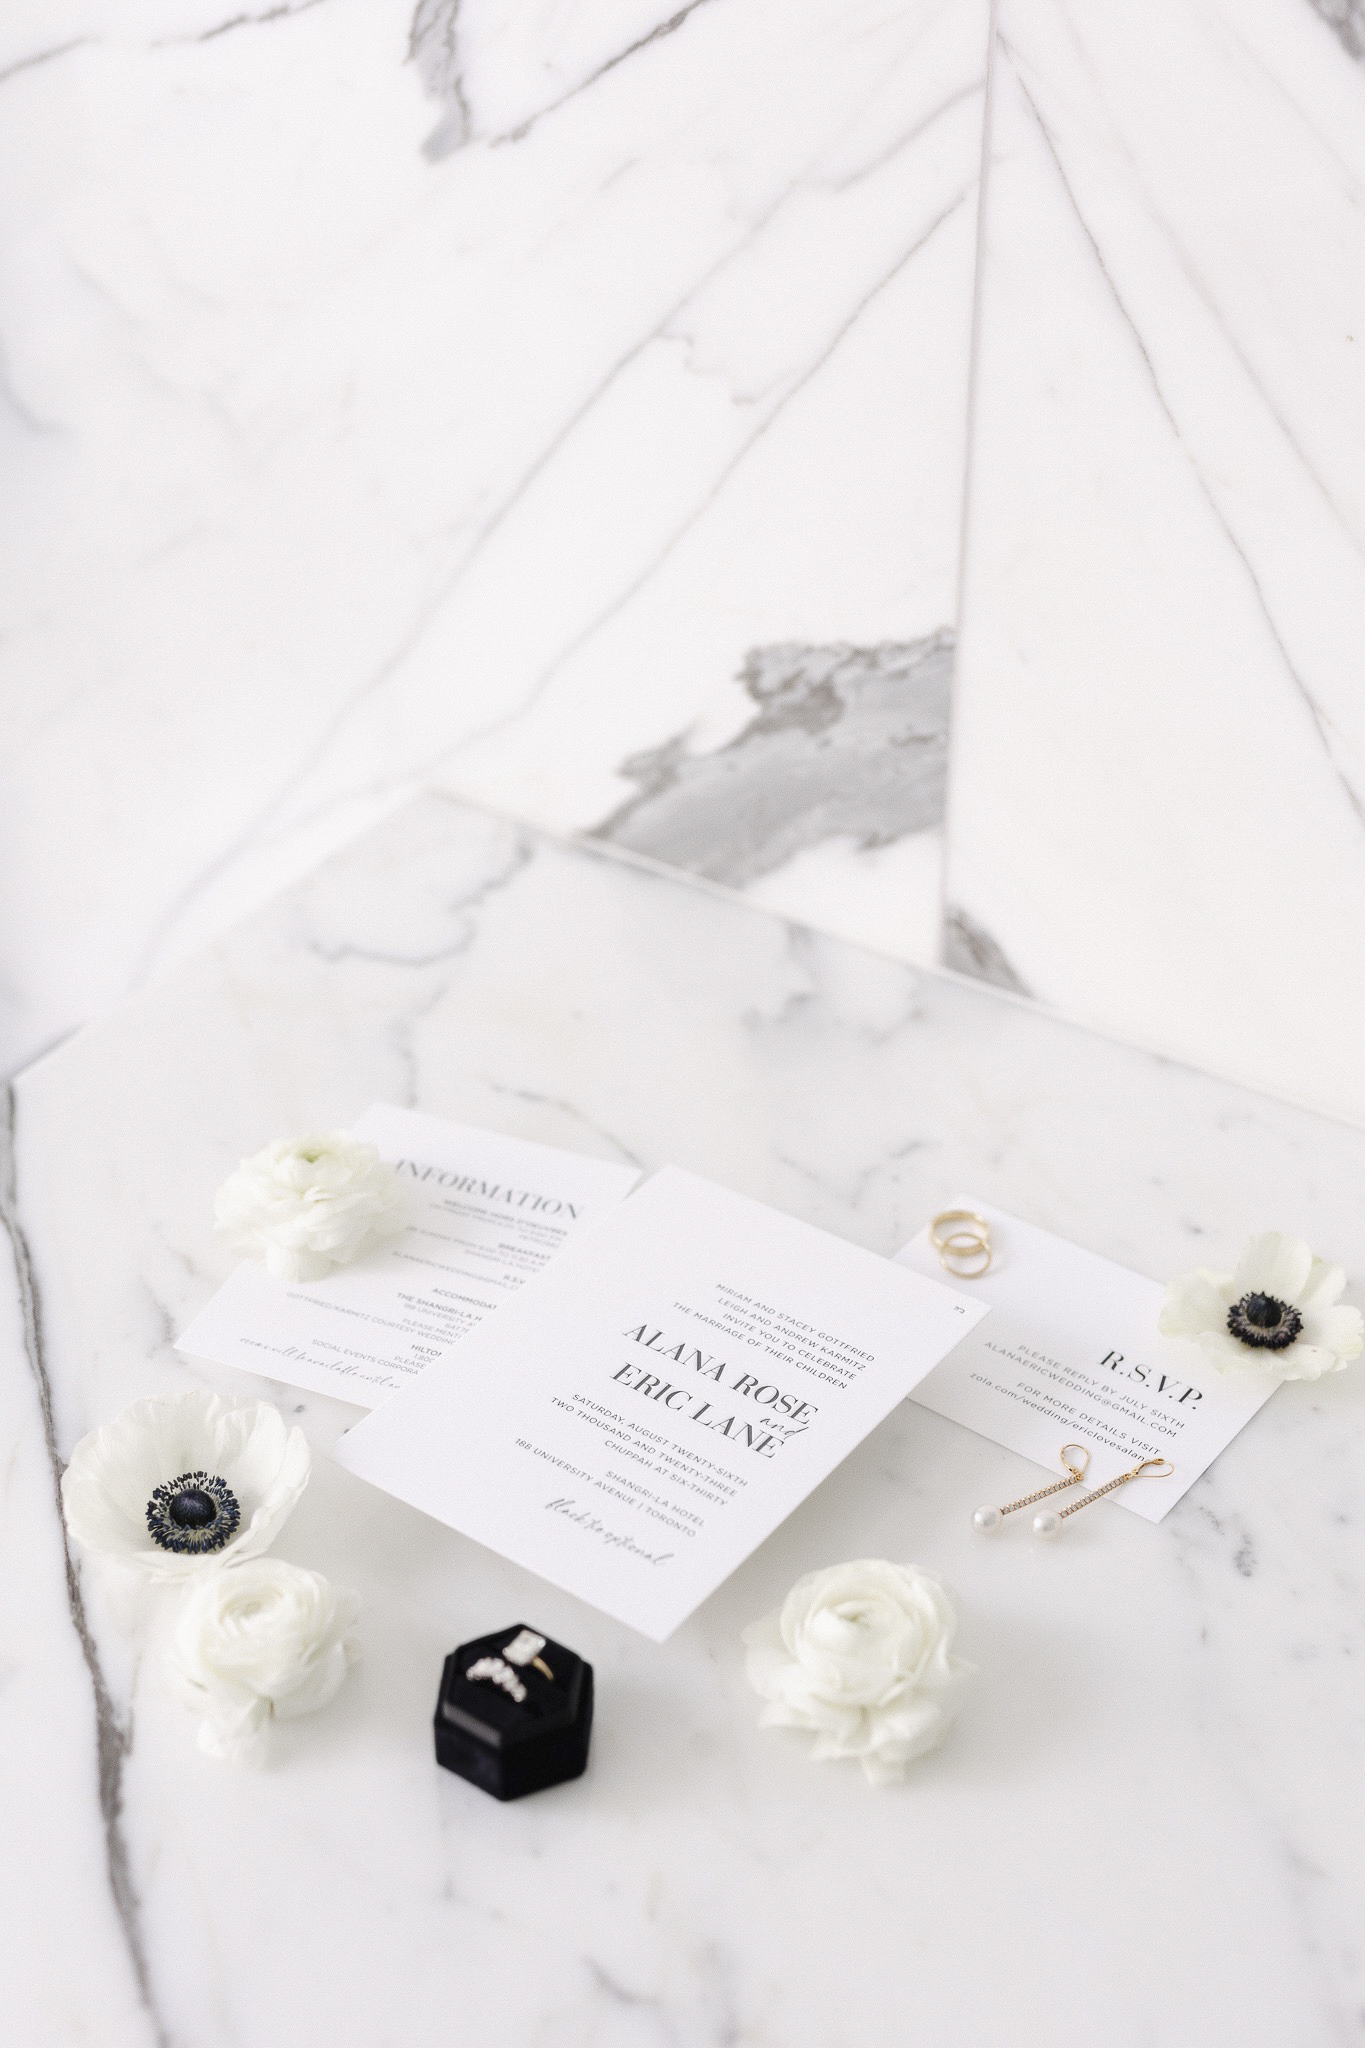 a wedding invitation cards and flowers, side angle